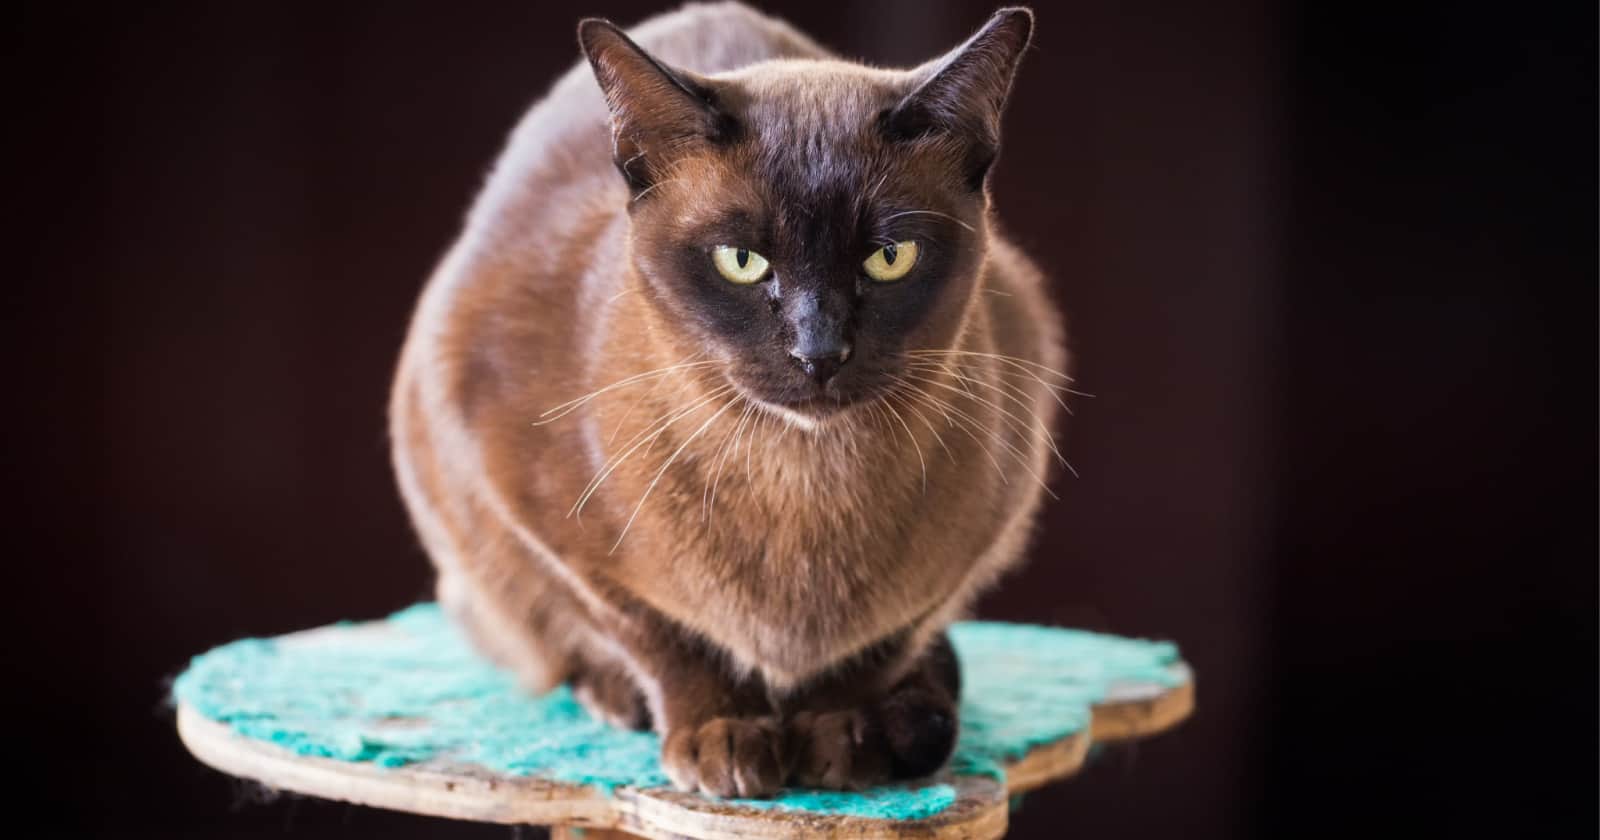 The Burmese is one of the best mouser cat breeds